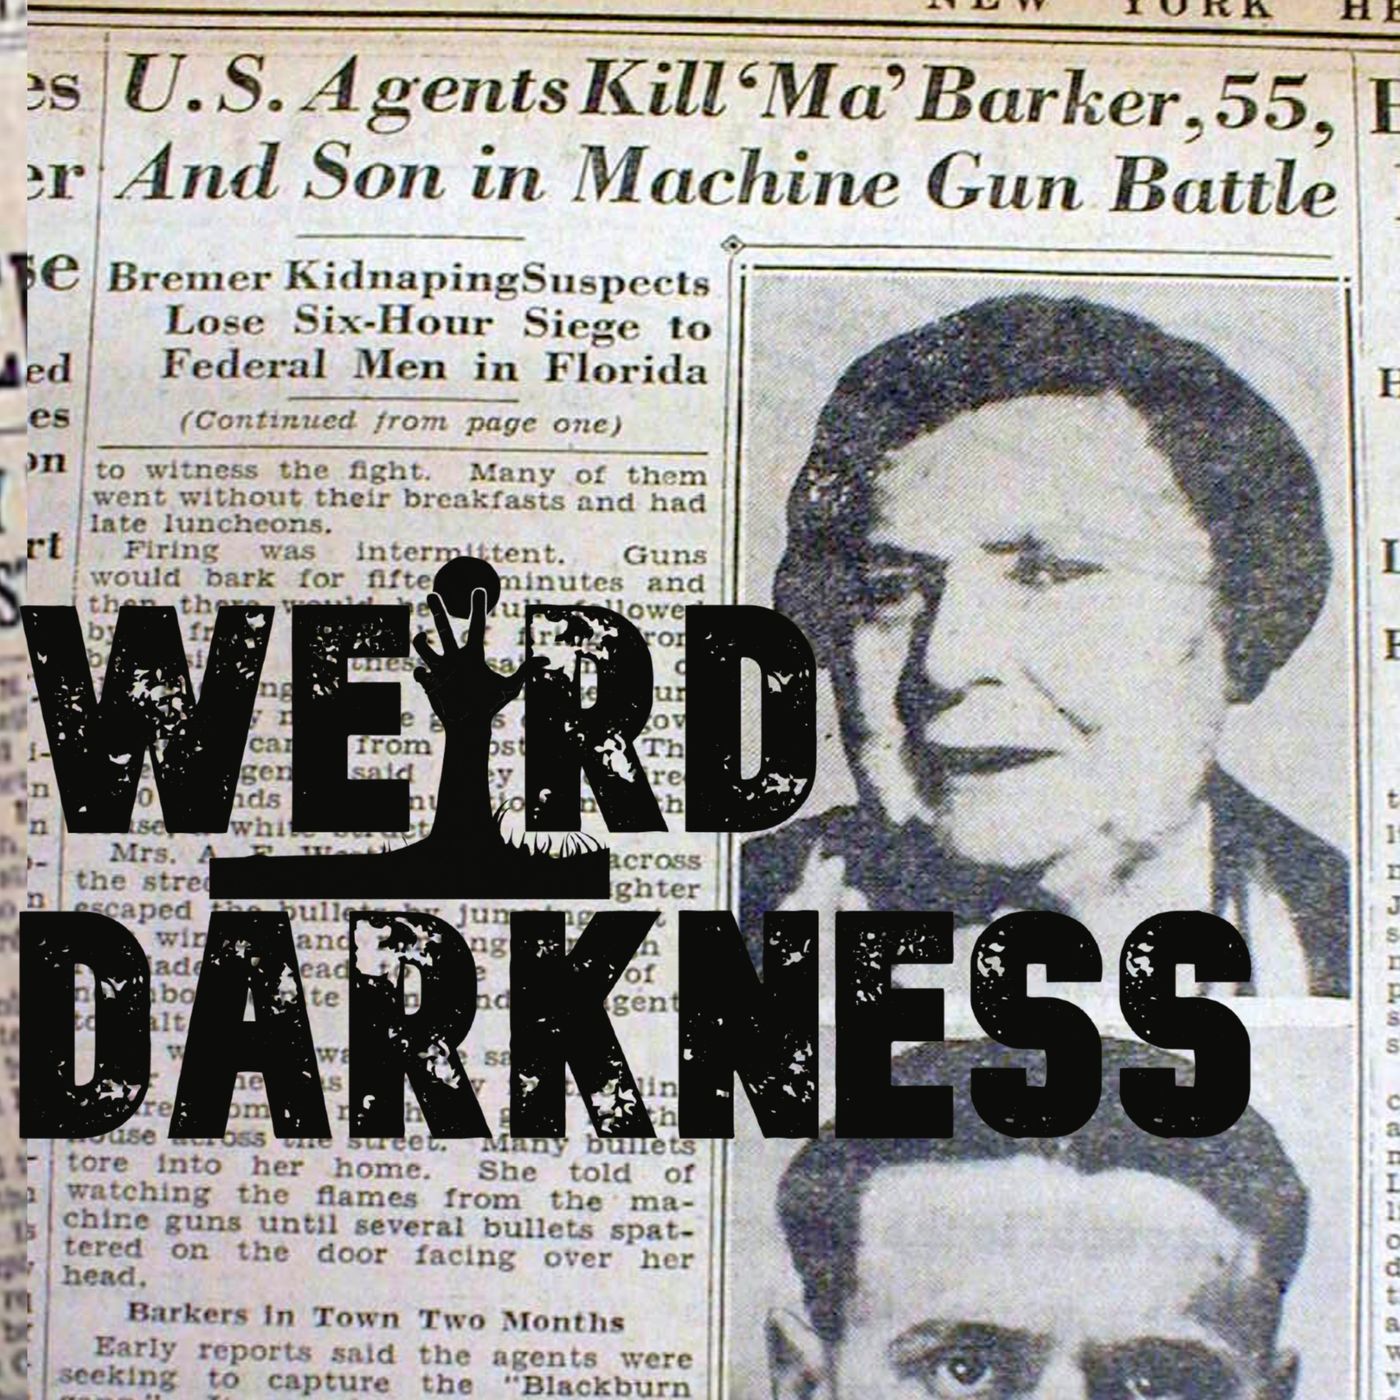 “THE LINGERING GHOST OF MA BARKER” and More Terrifying True Stories! #WeirdDarkness #Darkives